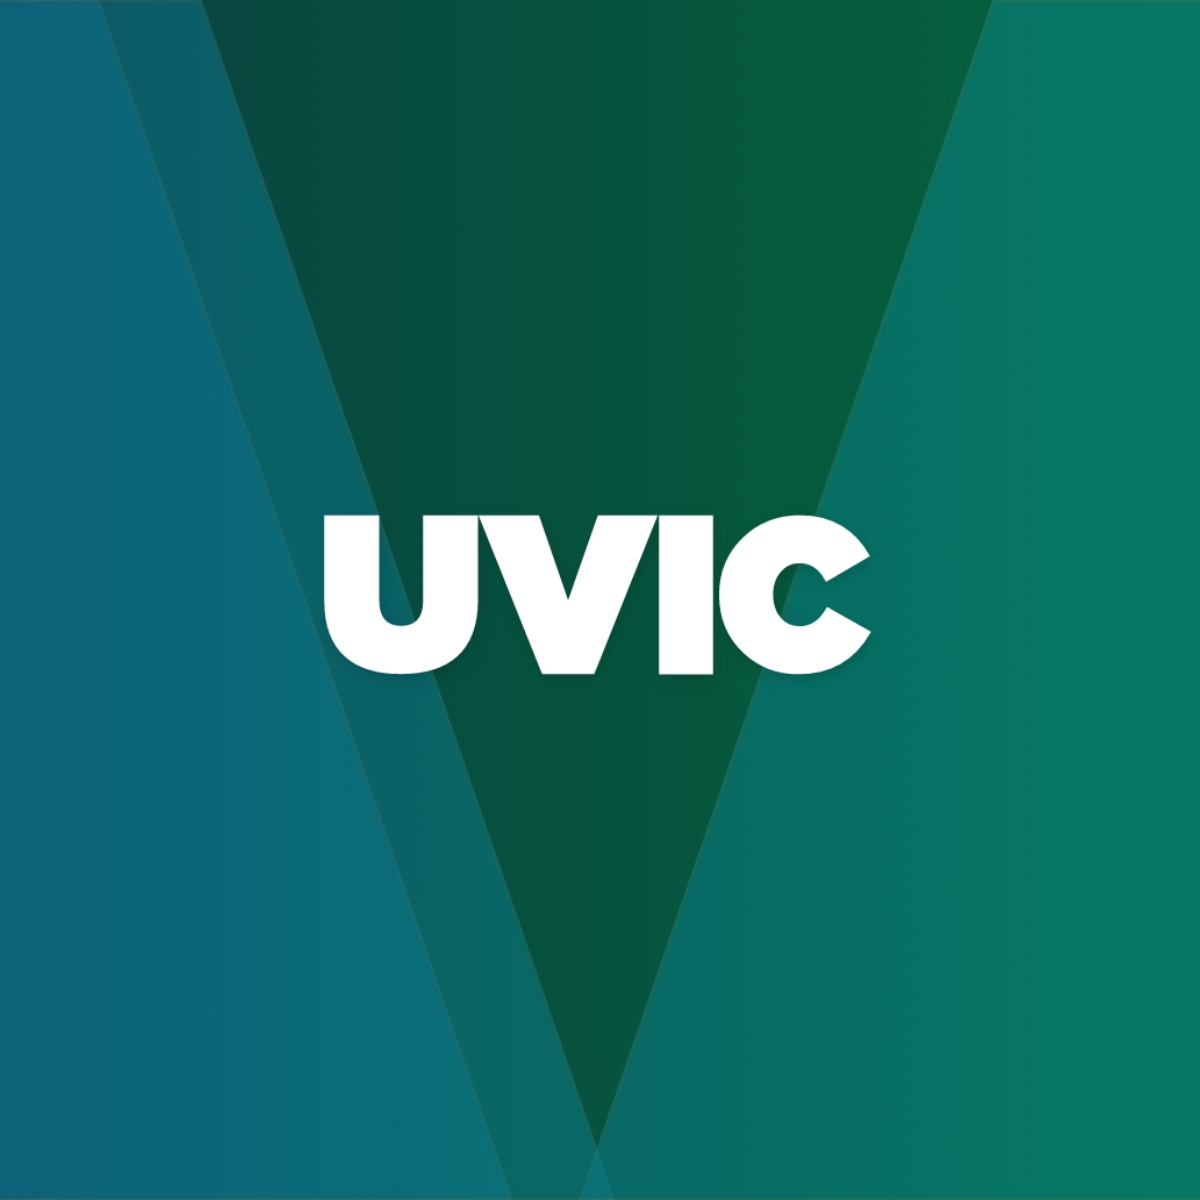 uvic feature2 - Knit